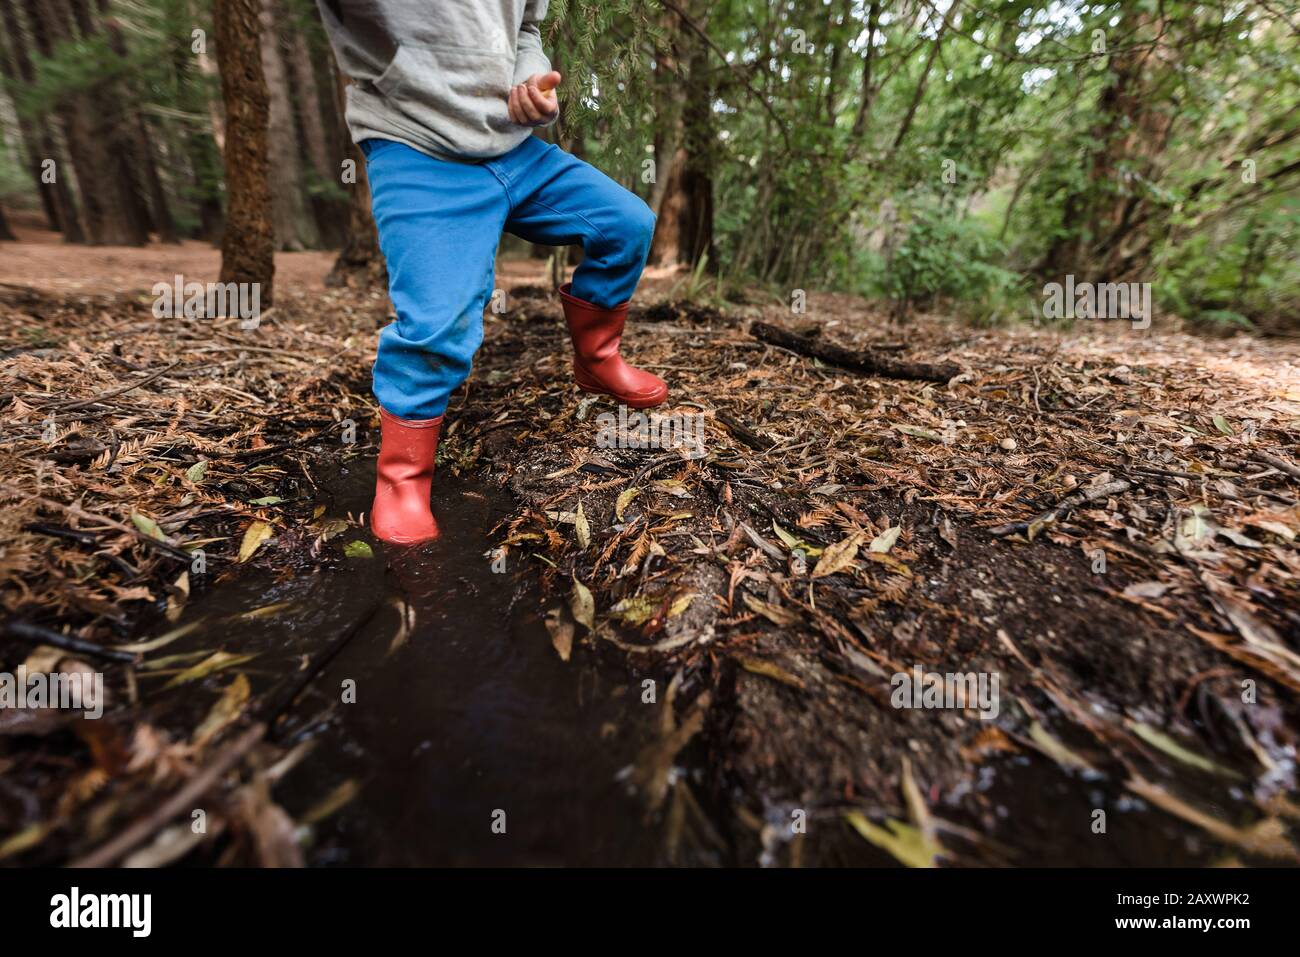 Young child with red boots stomping in mud in forest Stock Photo